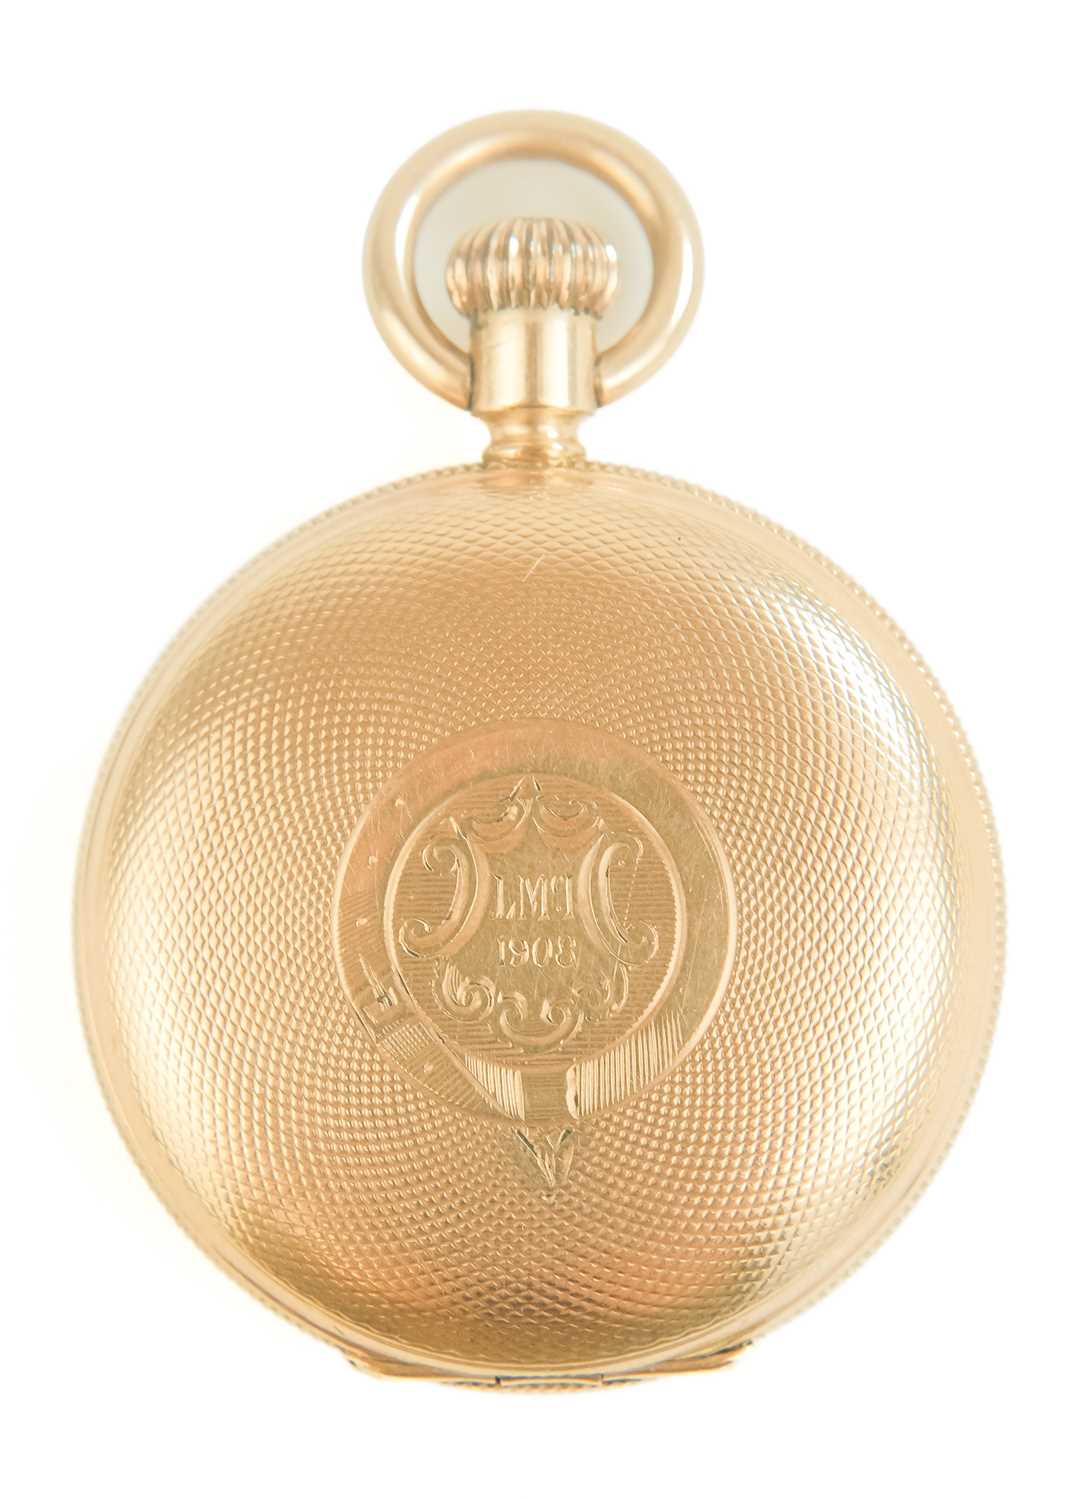 WALTHAM - A rose gold plated full hunter crown wind fob pocket watch. - Image 5 of 8